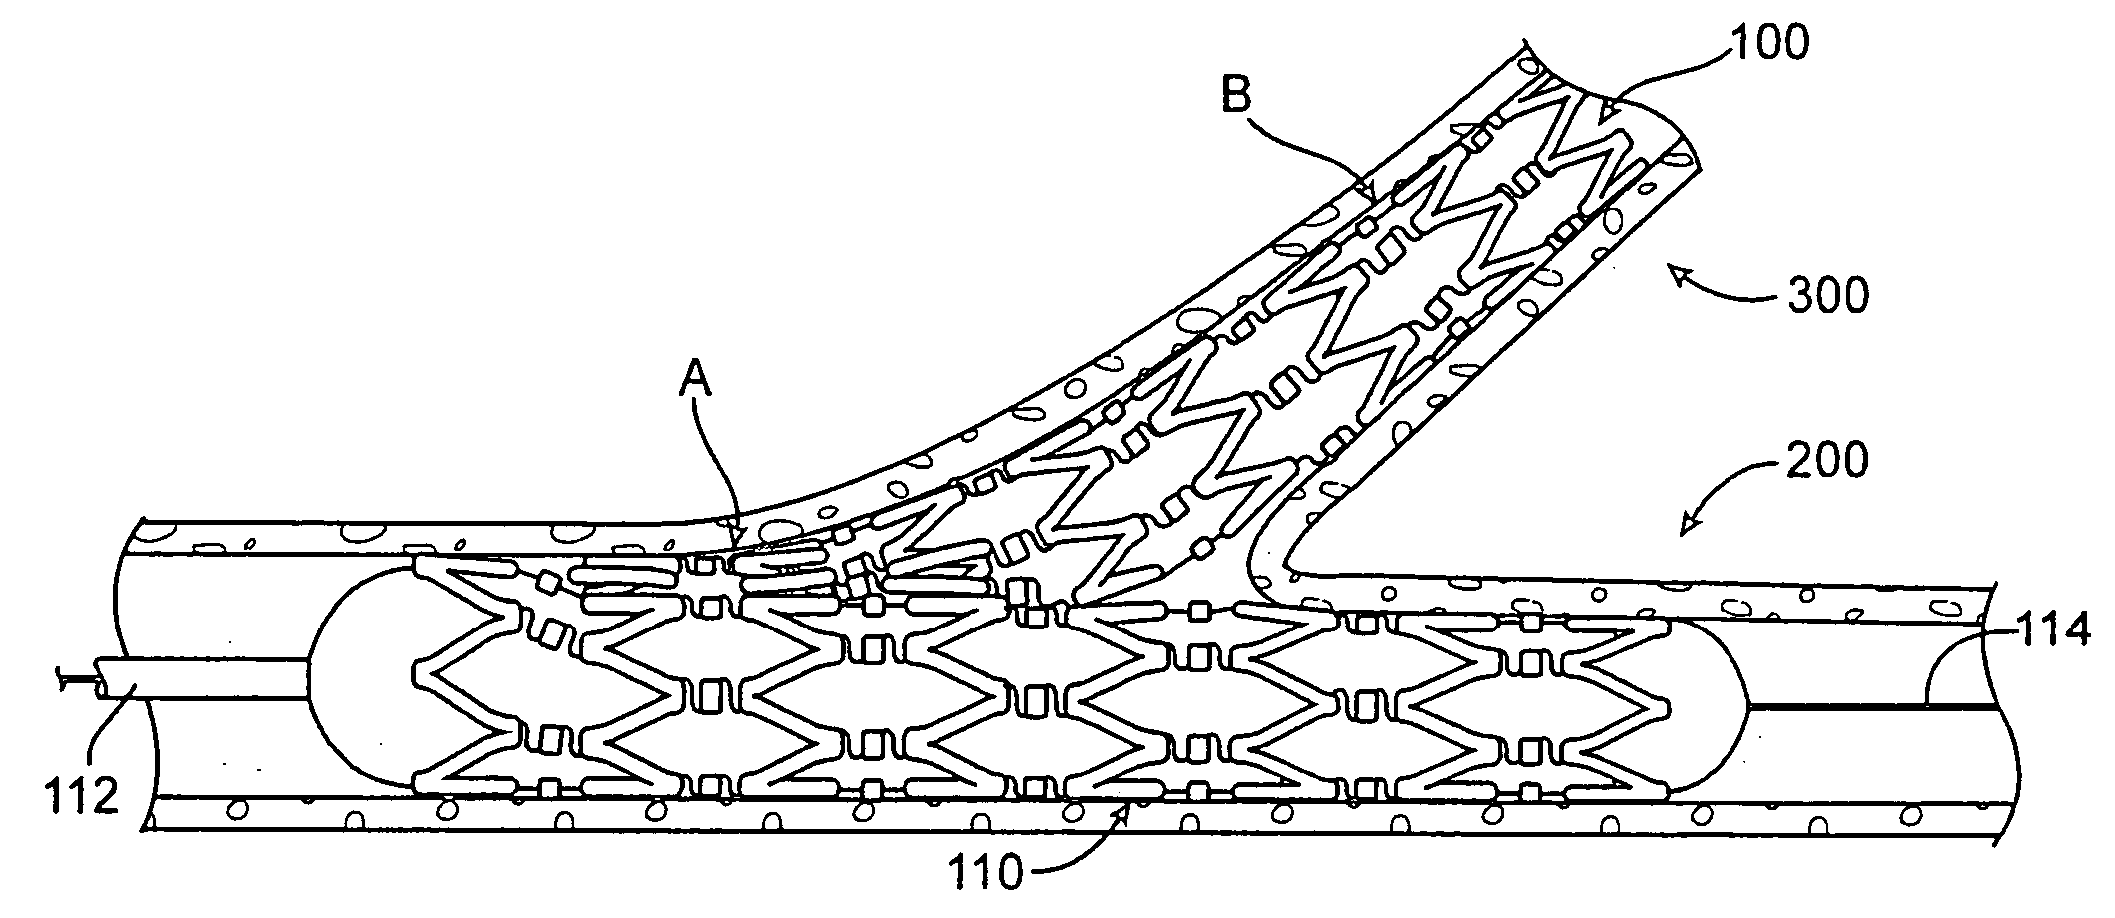 Bifurcation stent with crushable end and method for delivery of a stent to a bifurcation